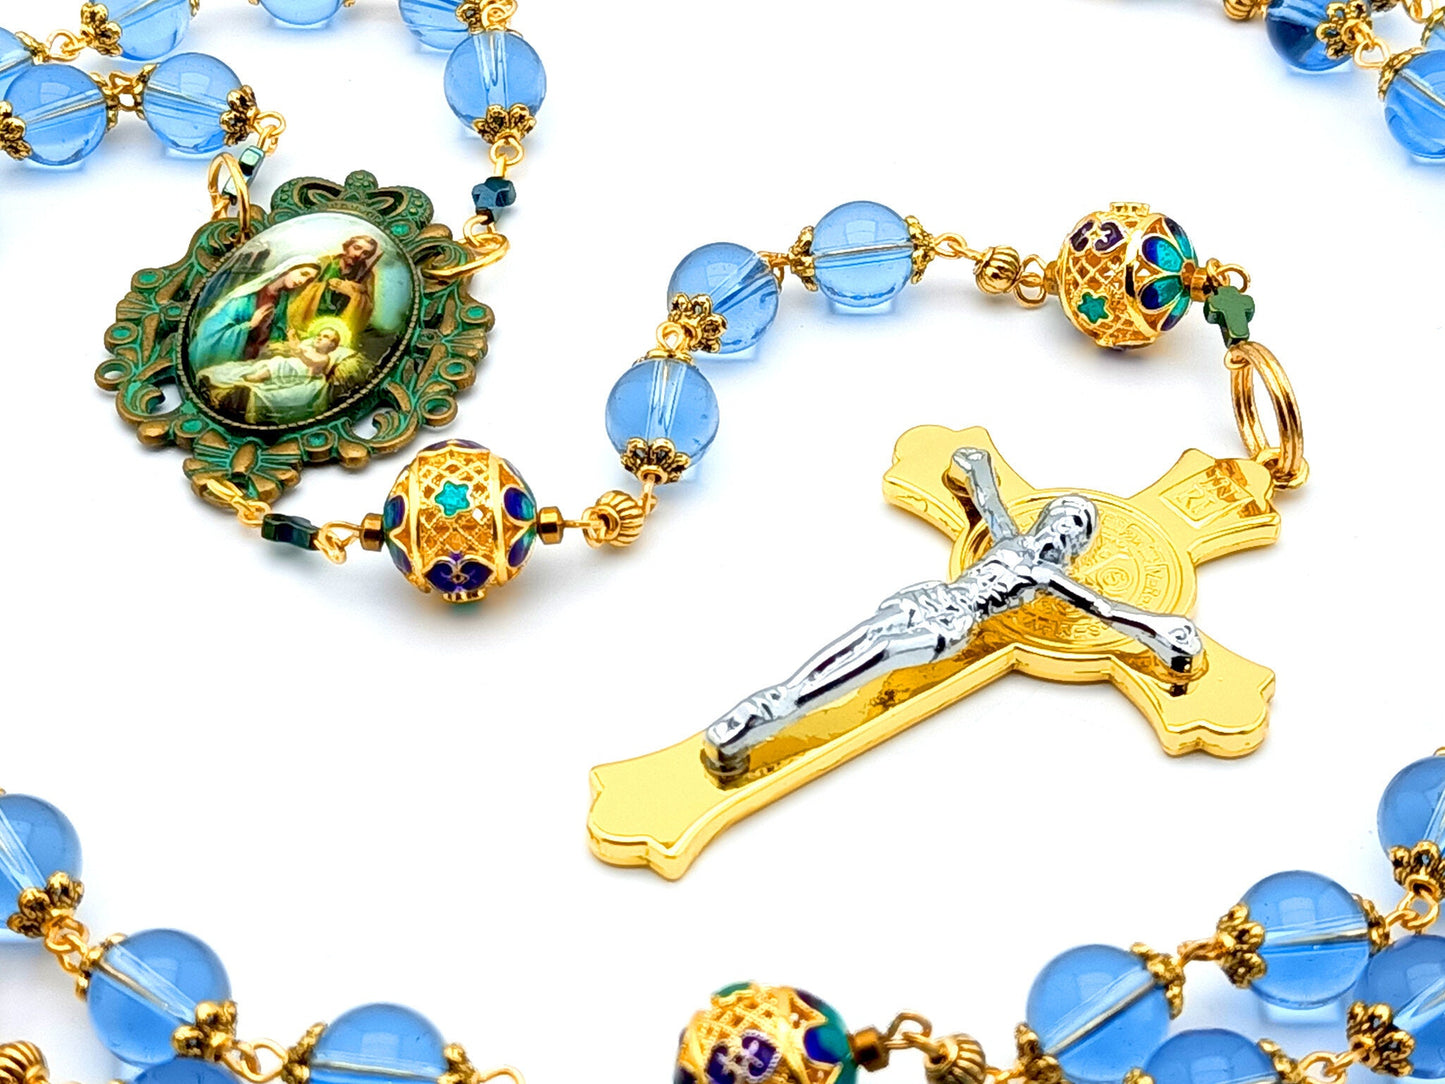 Holy Family unique rosary beads with blue glass and filigree gold beads, golden Saint Benedict crucifix and aged verdigris picture centre medal.